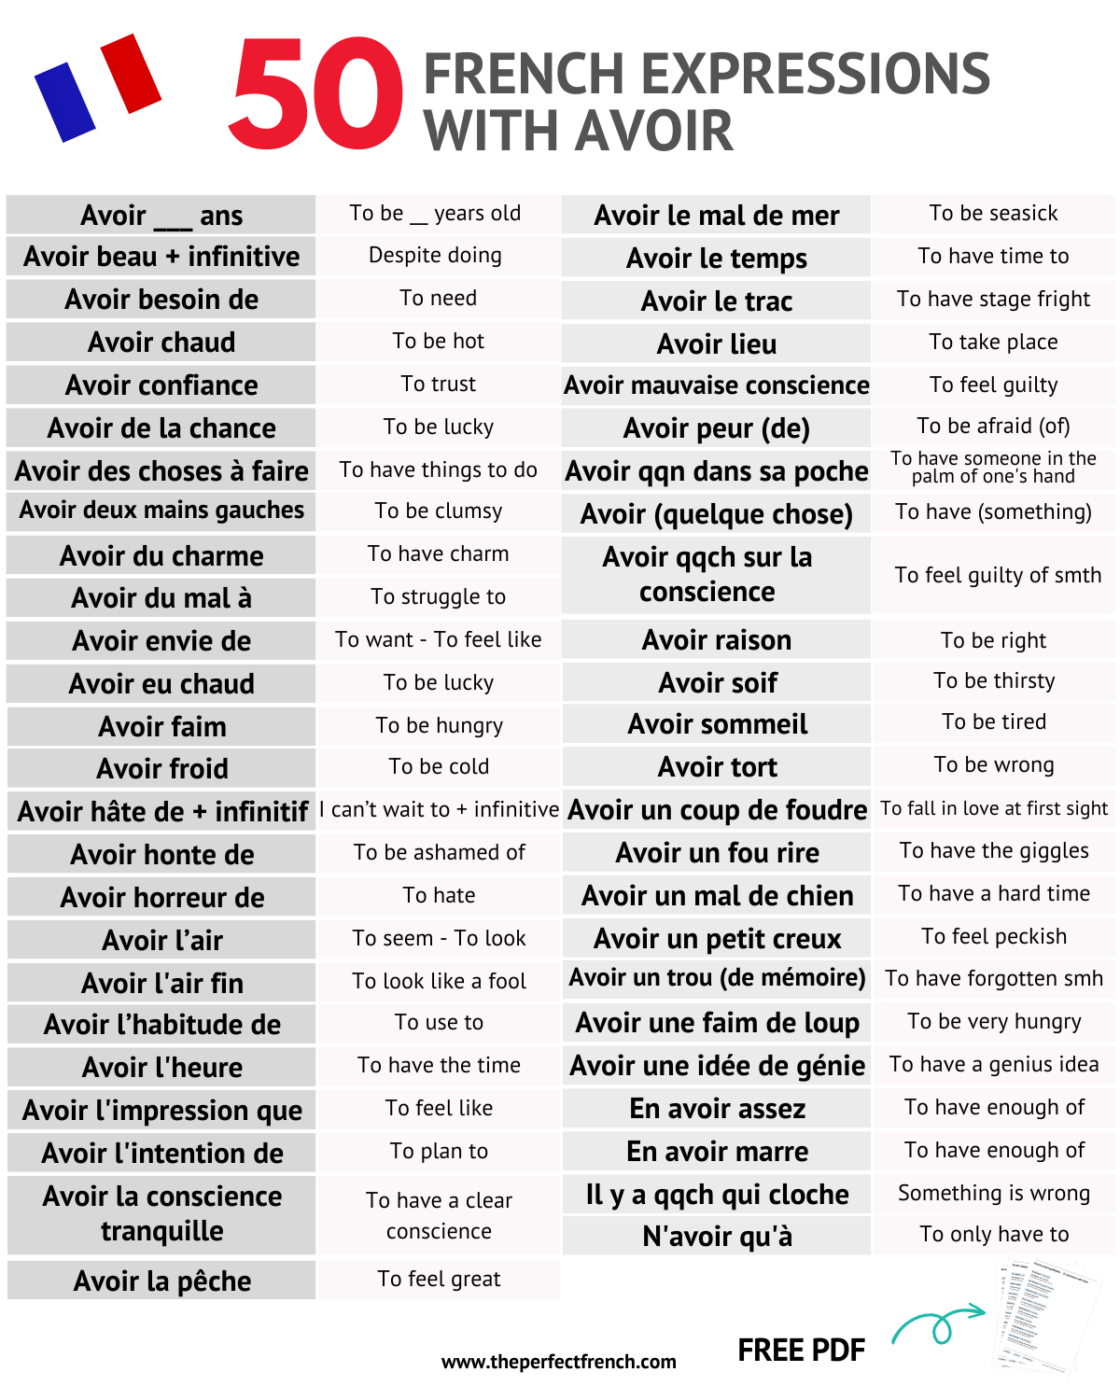 50-French-Expressions-with-Avoir